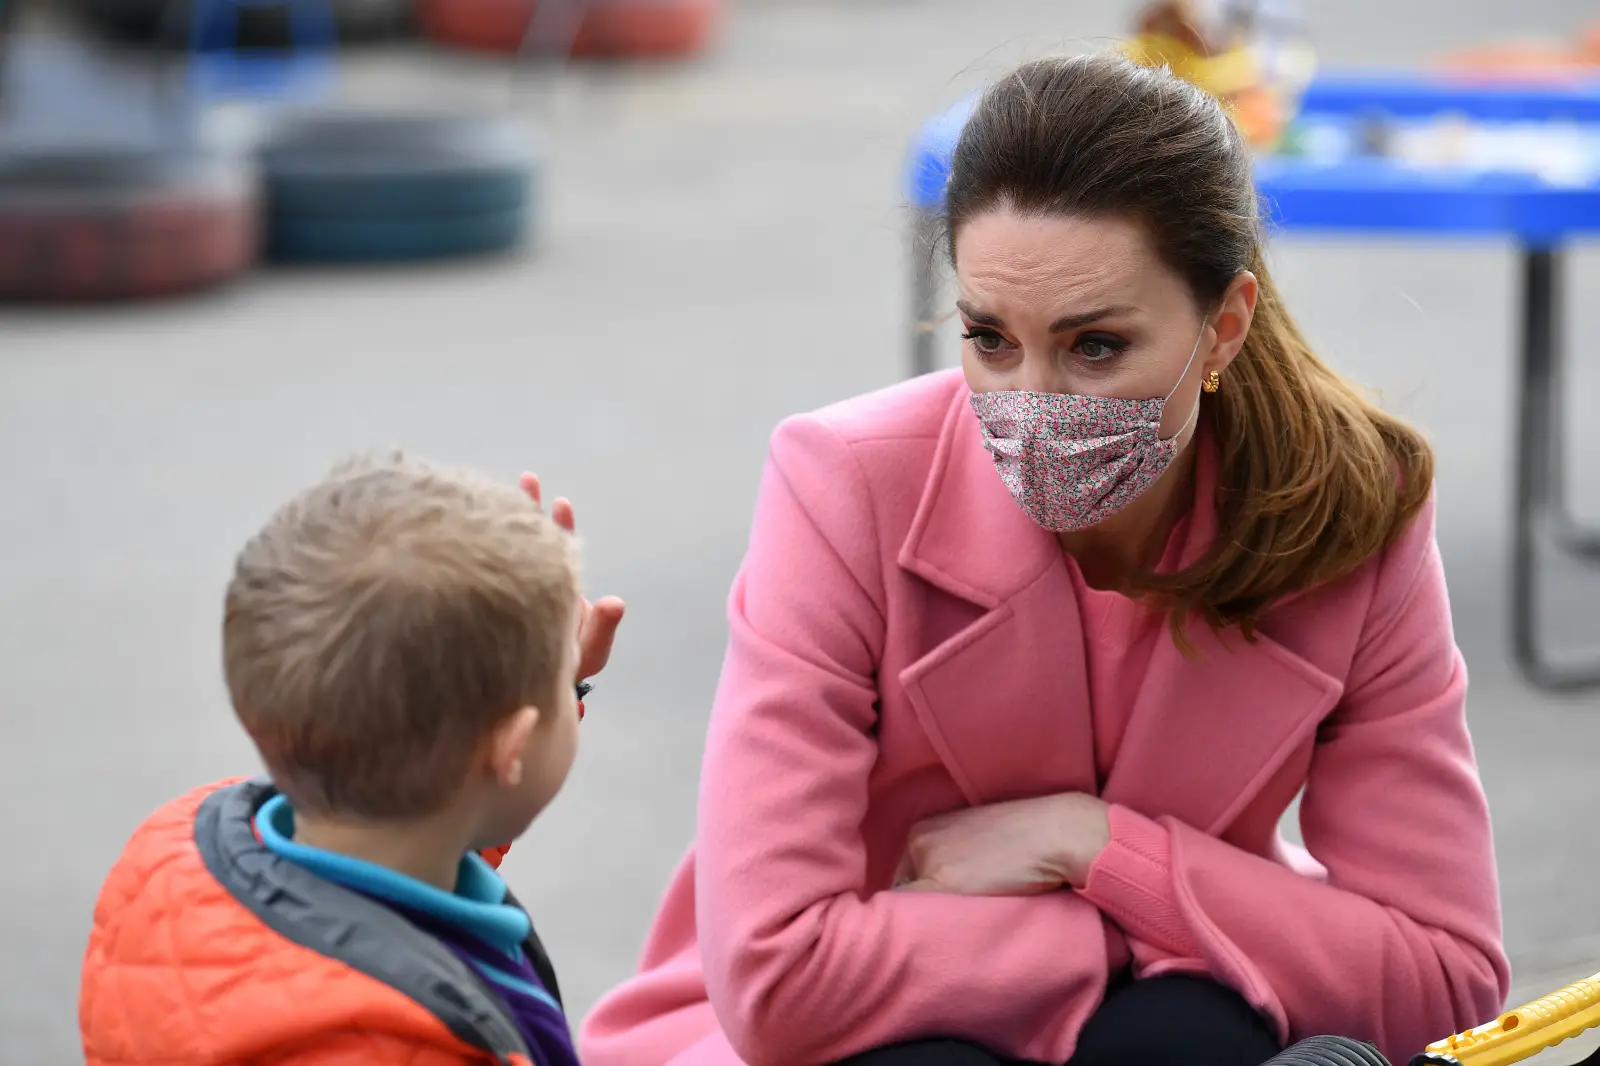 The Duchess of Cambridge’s Mentally Healthy Schools project that was launched in 2018 is being implemented in the school and they learnt about its progress.